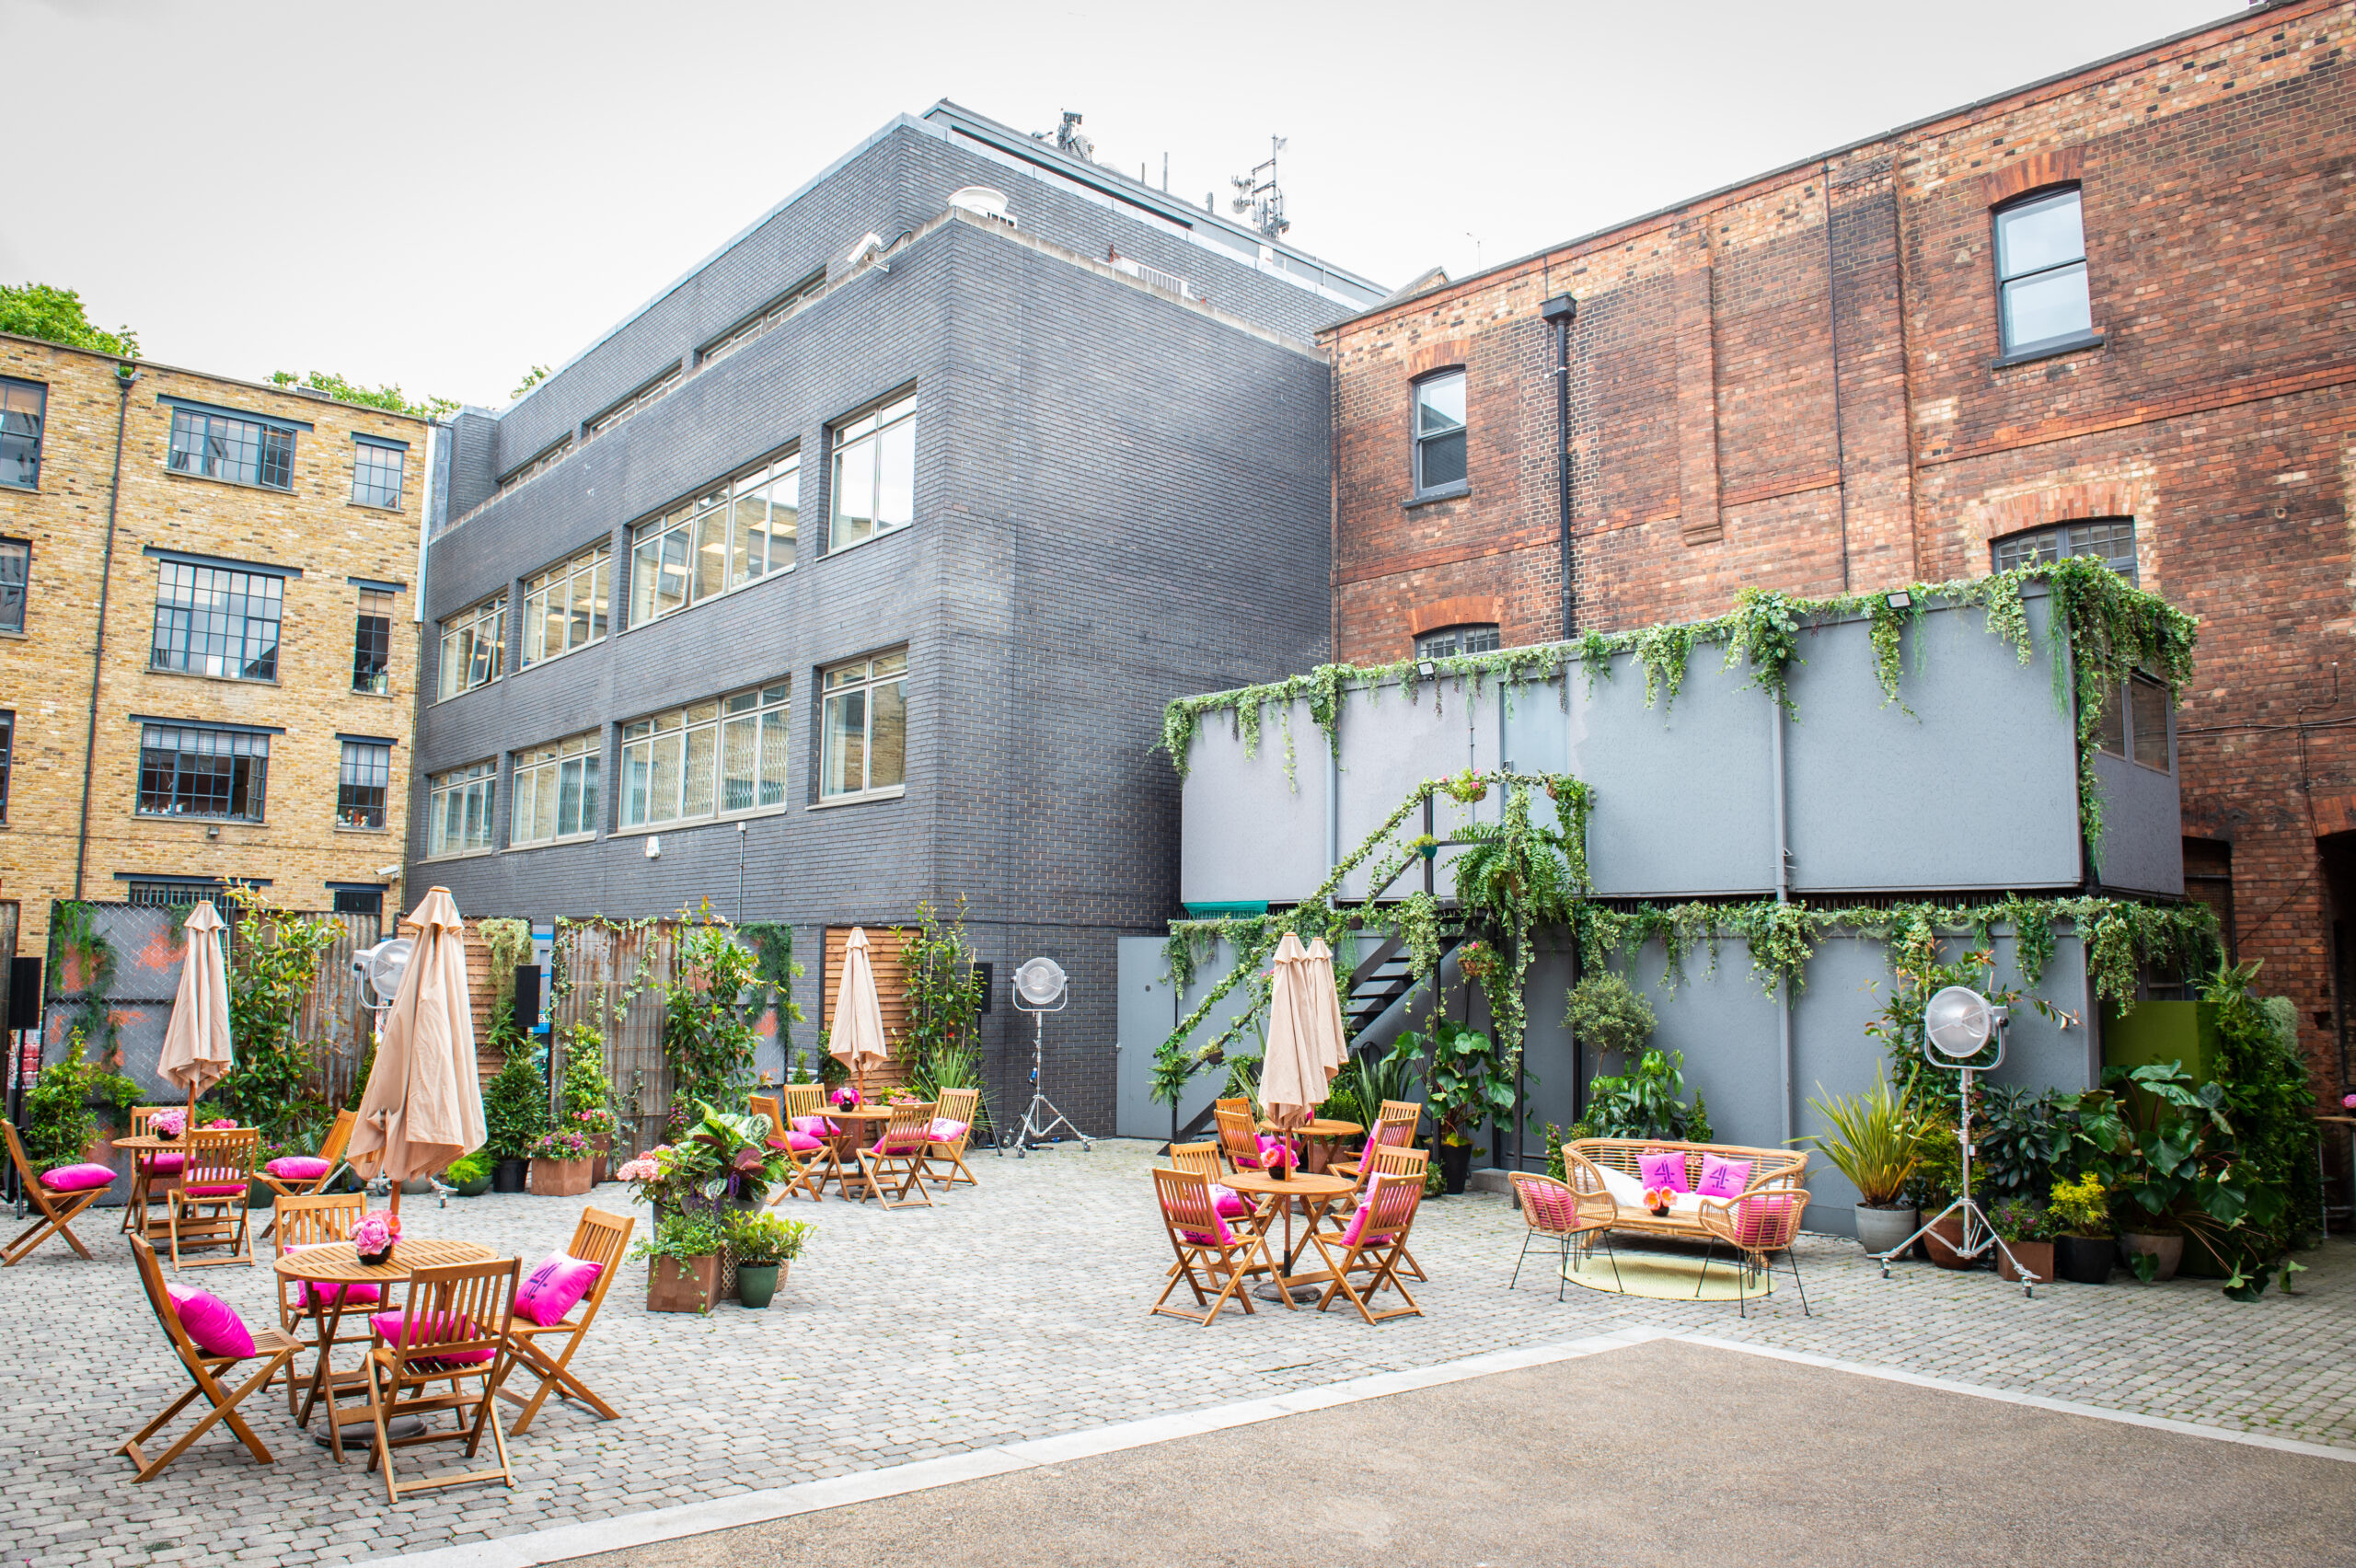 An industrial courtyard with event planting